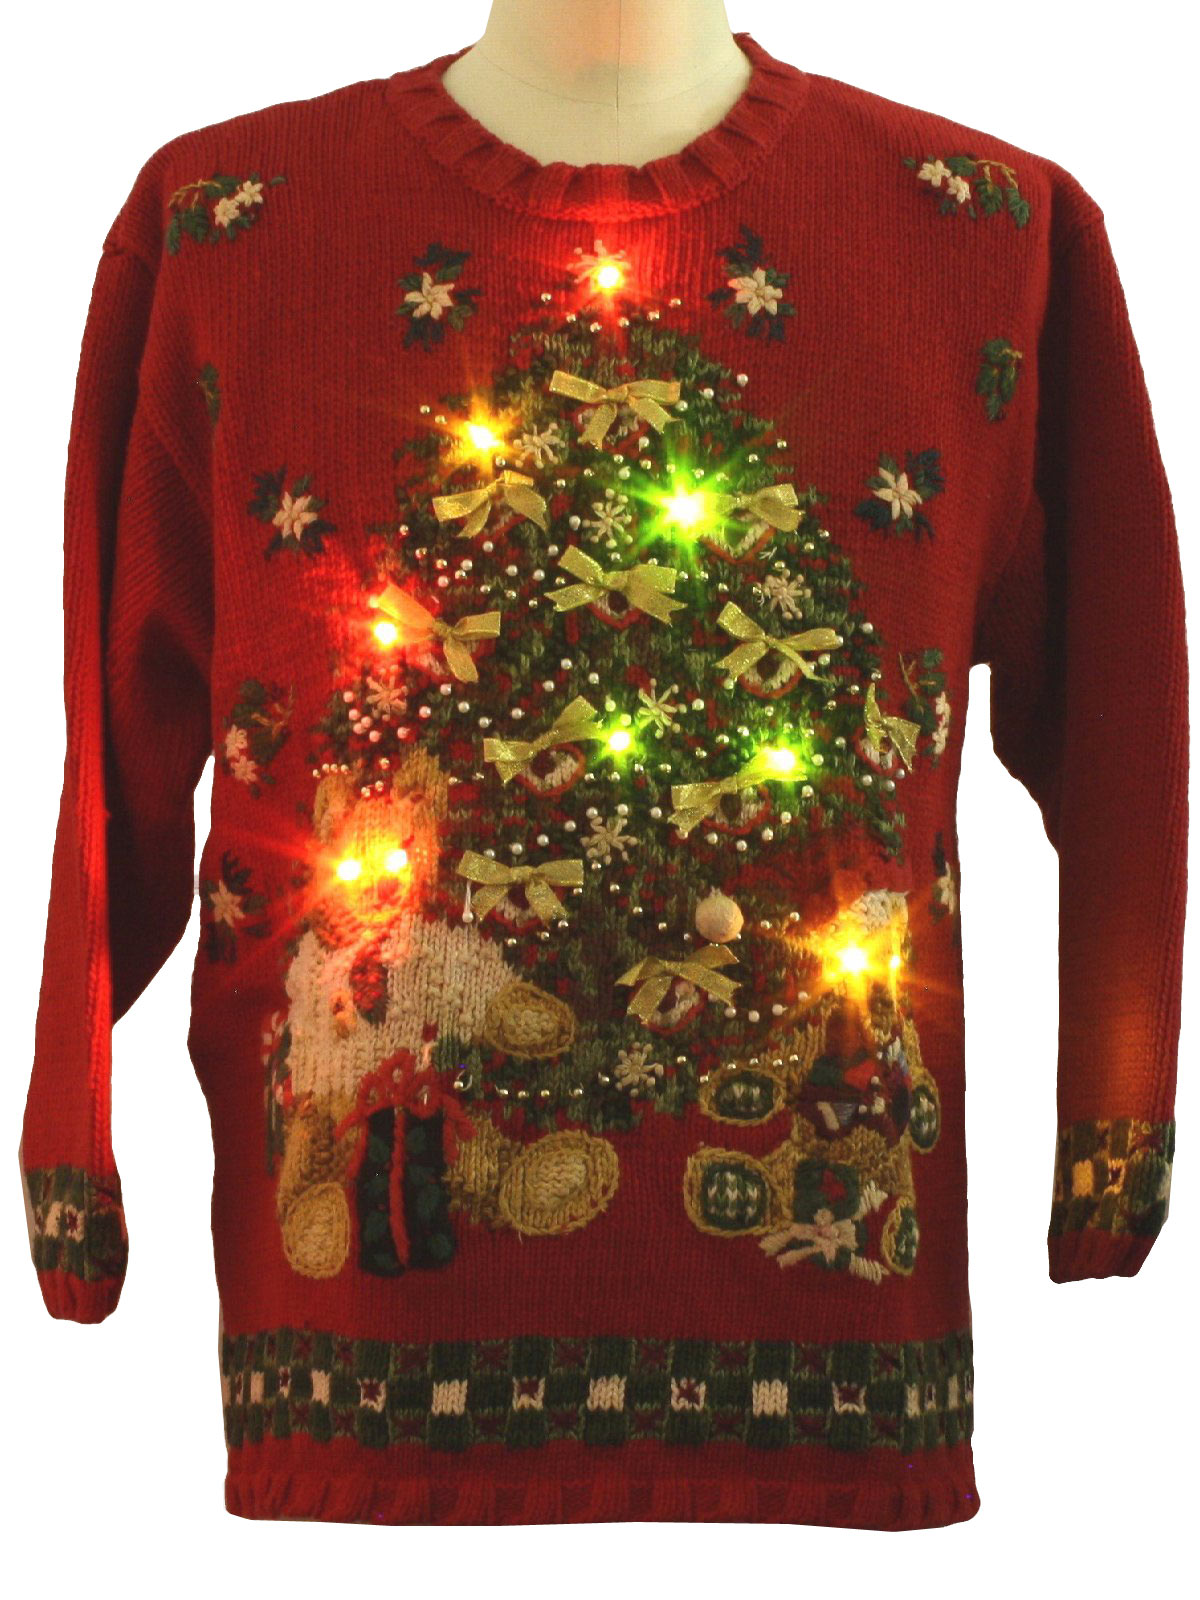 Lightup Ugly Christmas Sweater: -Tiara Women- Unisex Red background ...